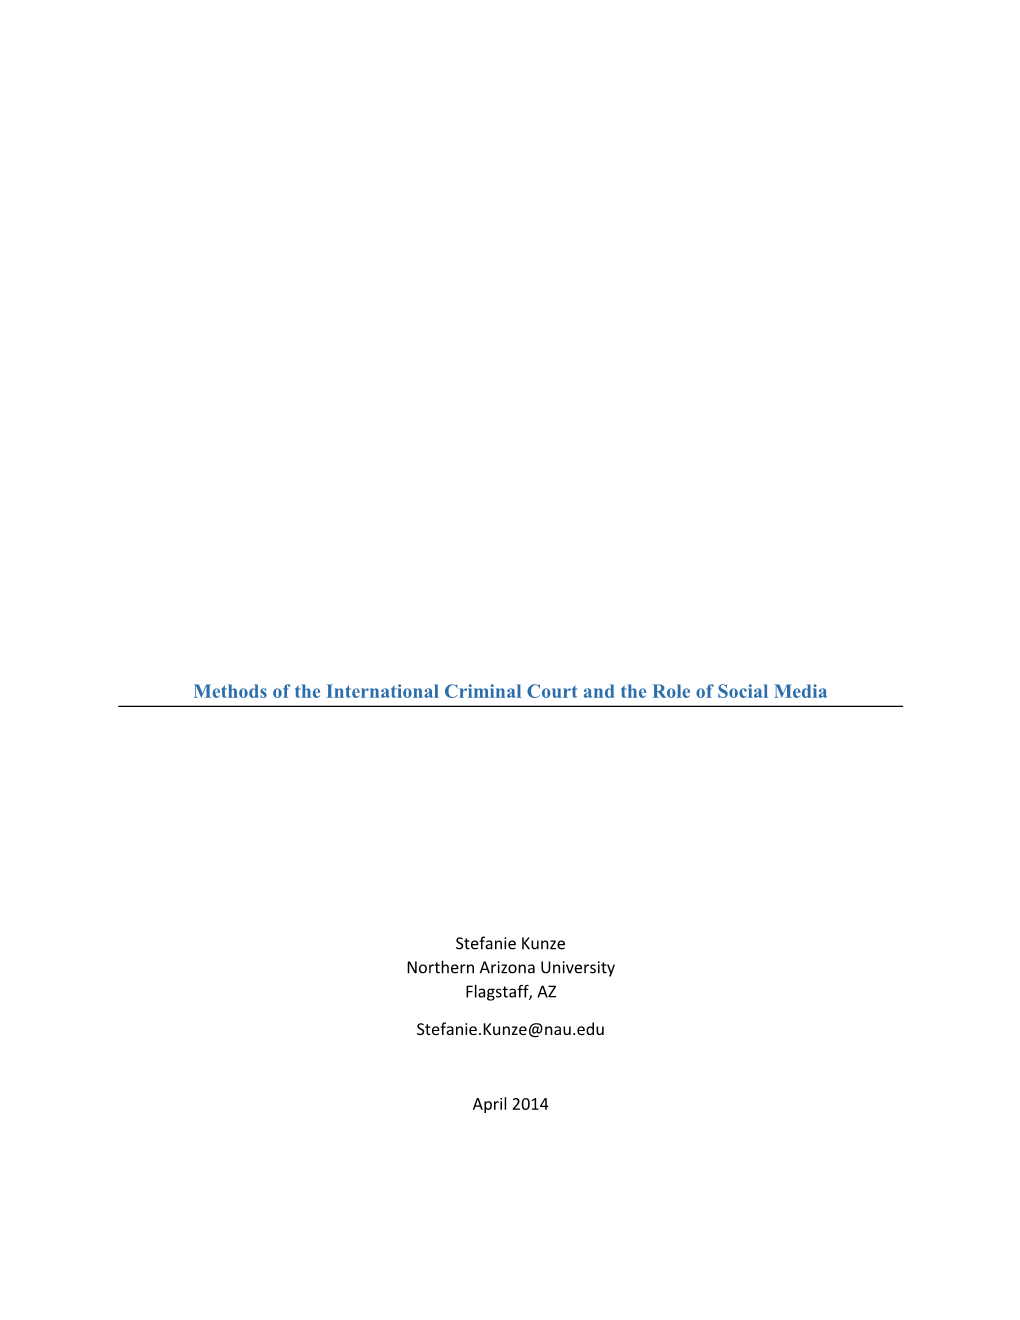 Methods of the International Criminal Court and the Role of Social Media